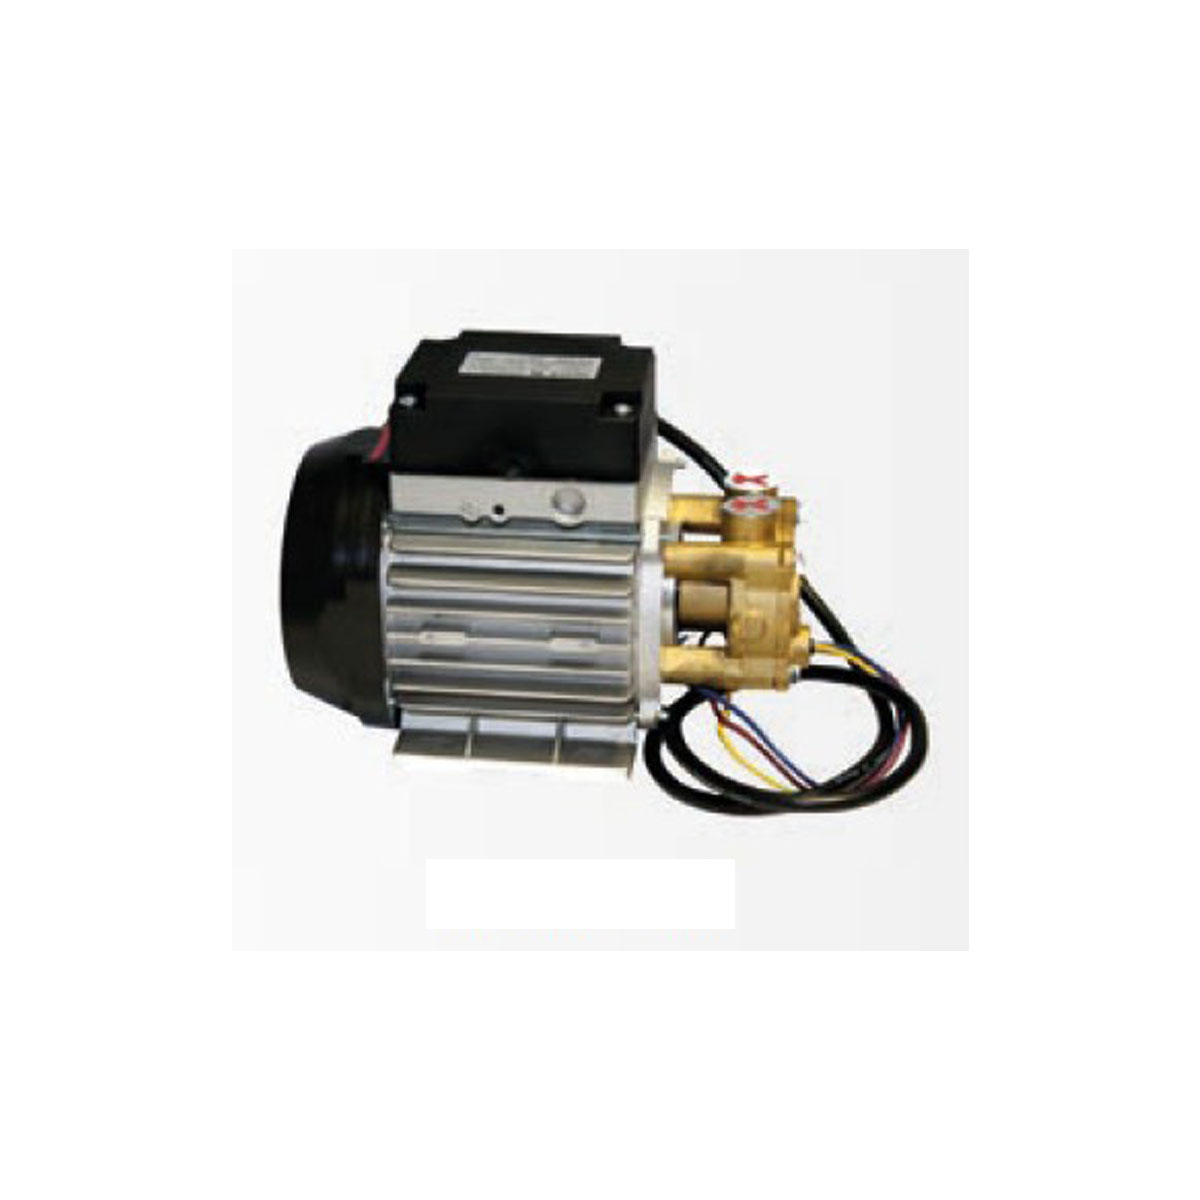 Speck water pump normal suction type LNY2841, 230 Volt, high box, brass  head, 230V/50Hz/1,25A, L x W x H = 196 x 108 x 140 mm.